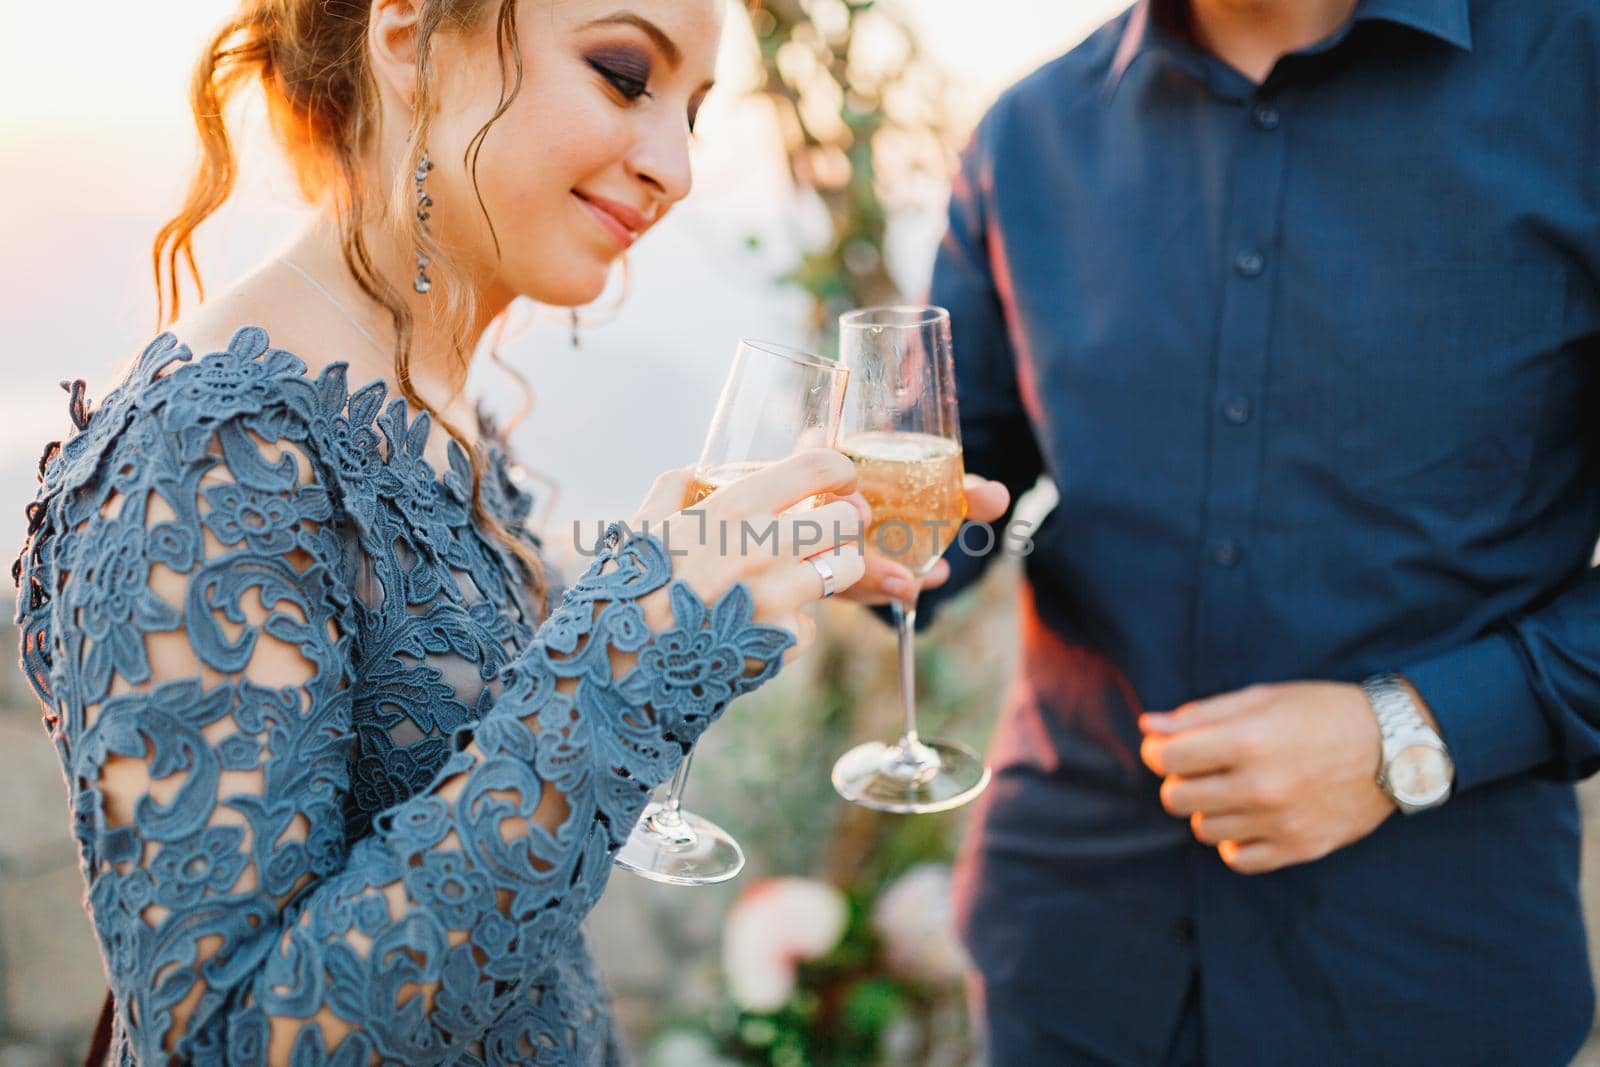 Bride and groom drink champagne from glasses near the wedding arch during the wedding ceremony . High quality photo